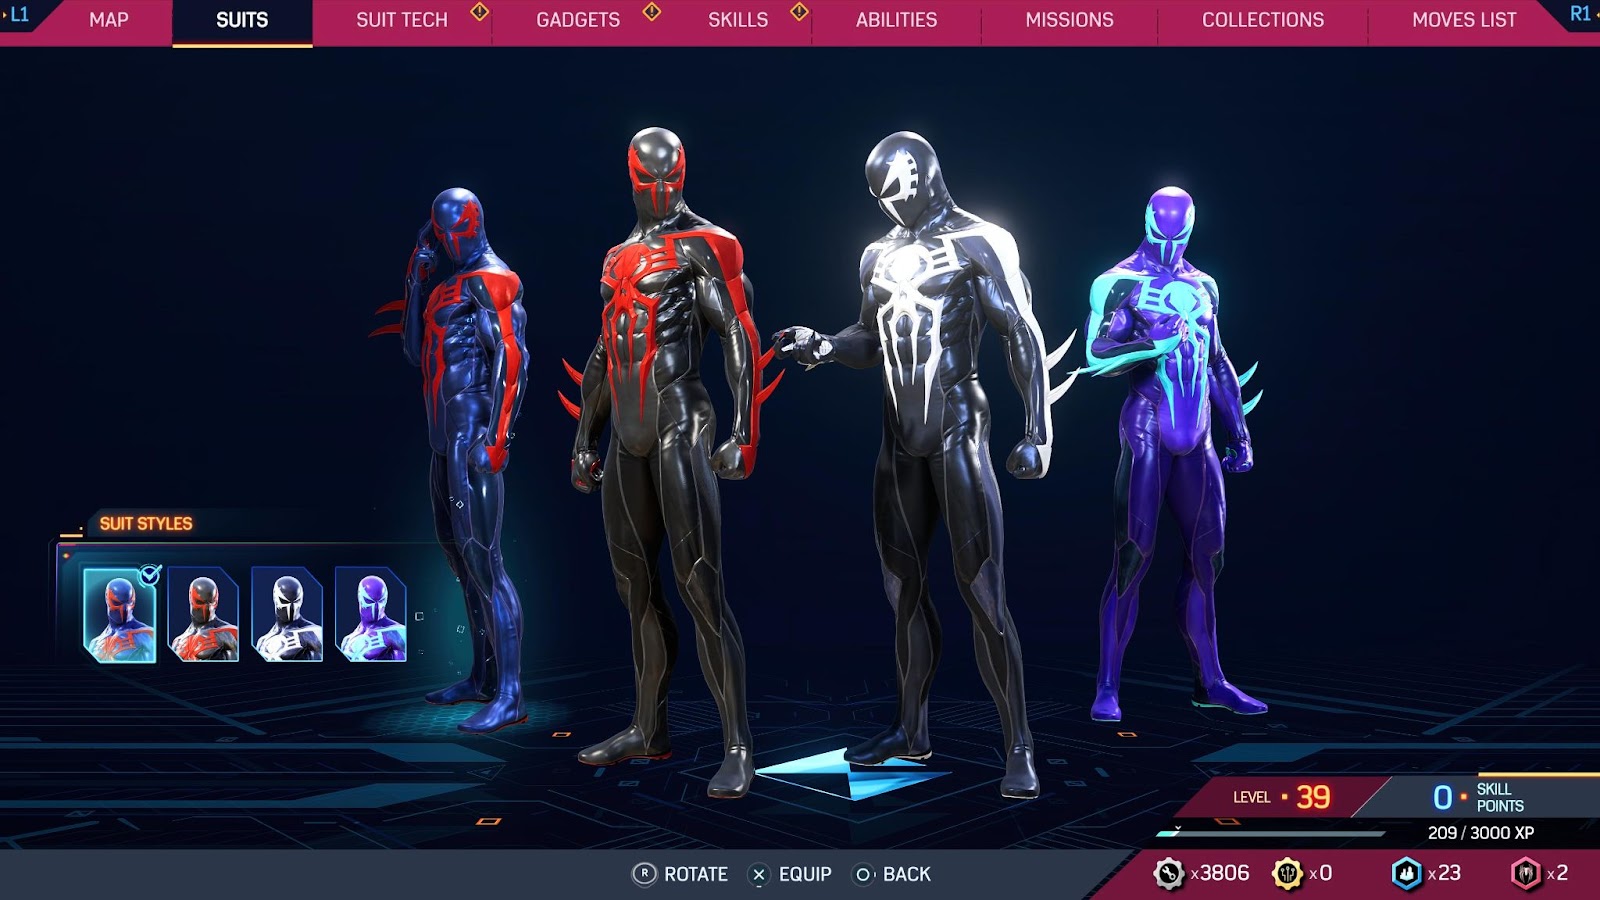 An in game image of Peter Parker in the Spider-Man 2099 Black Suit from Marvel's Spider-Man 2.